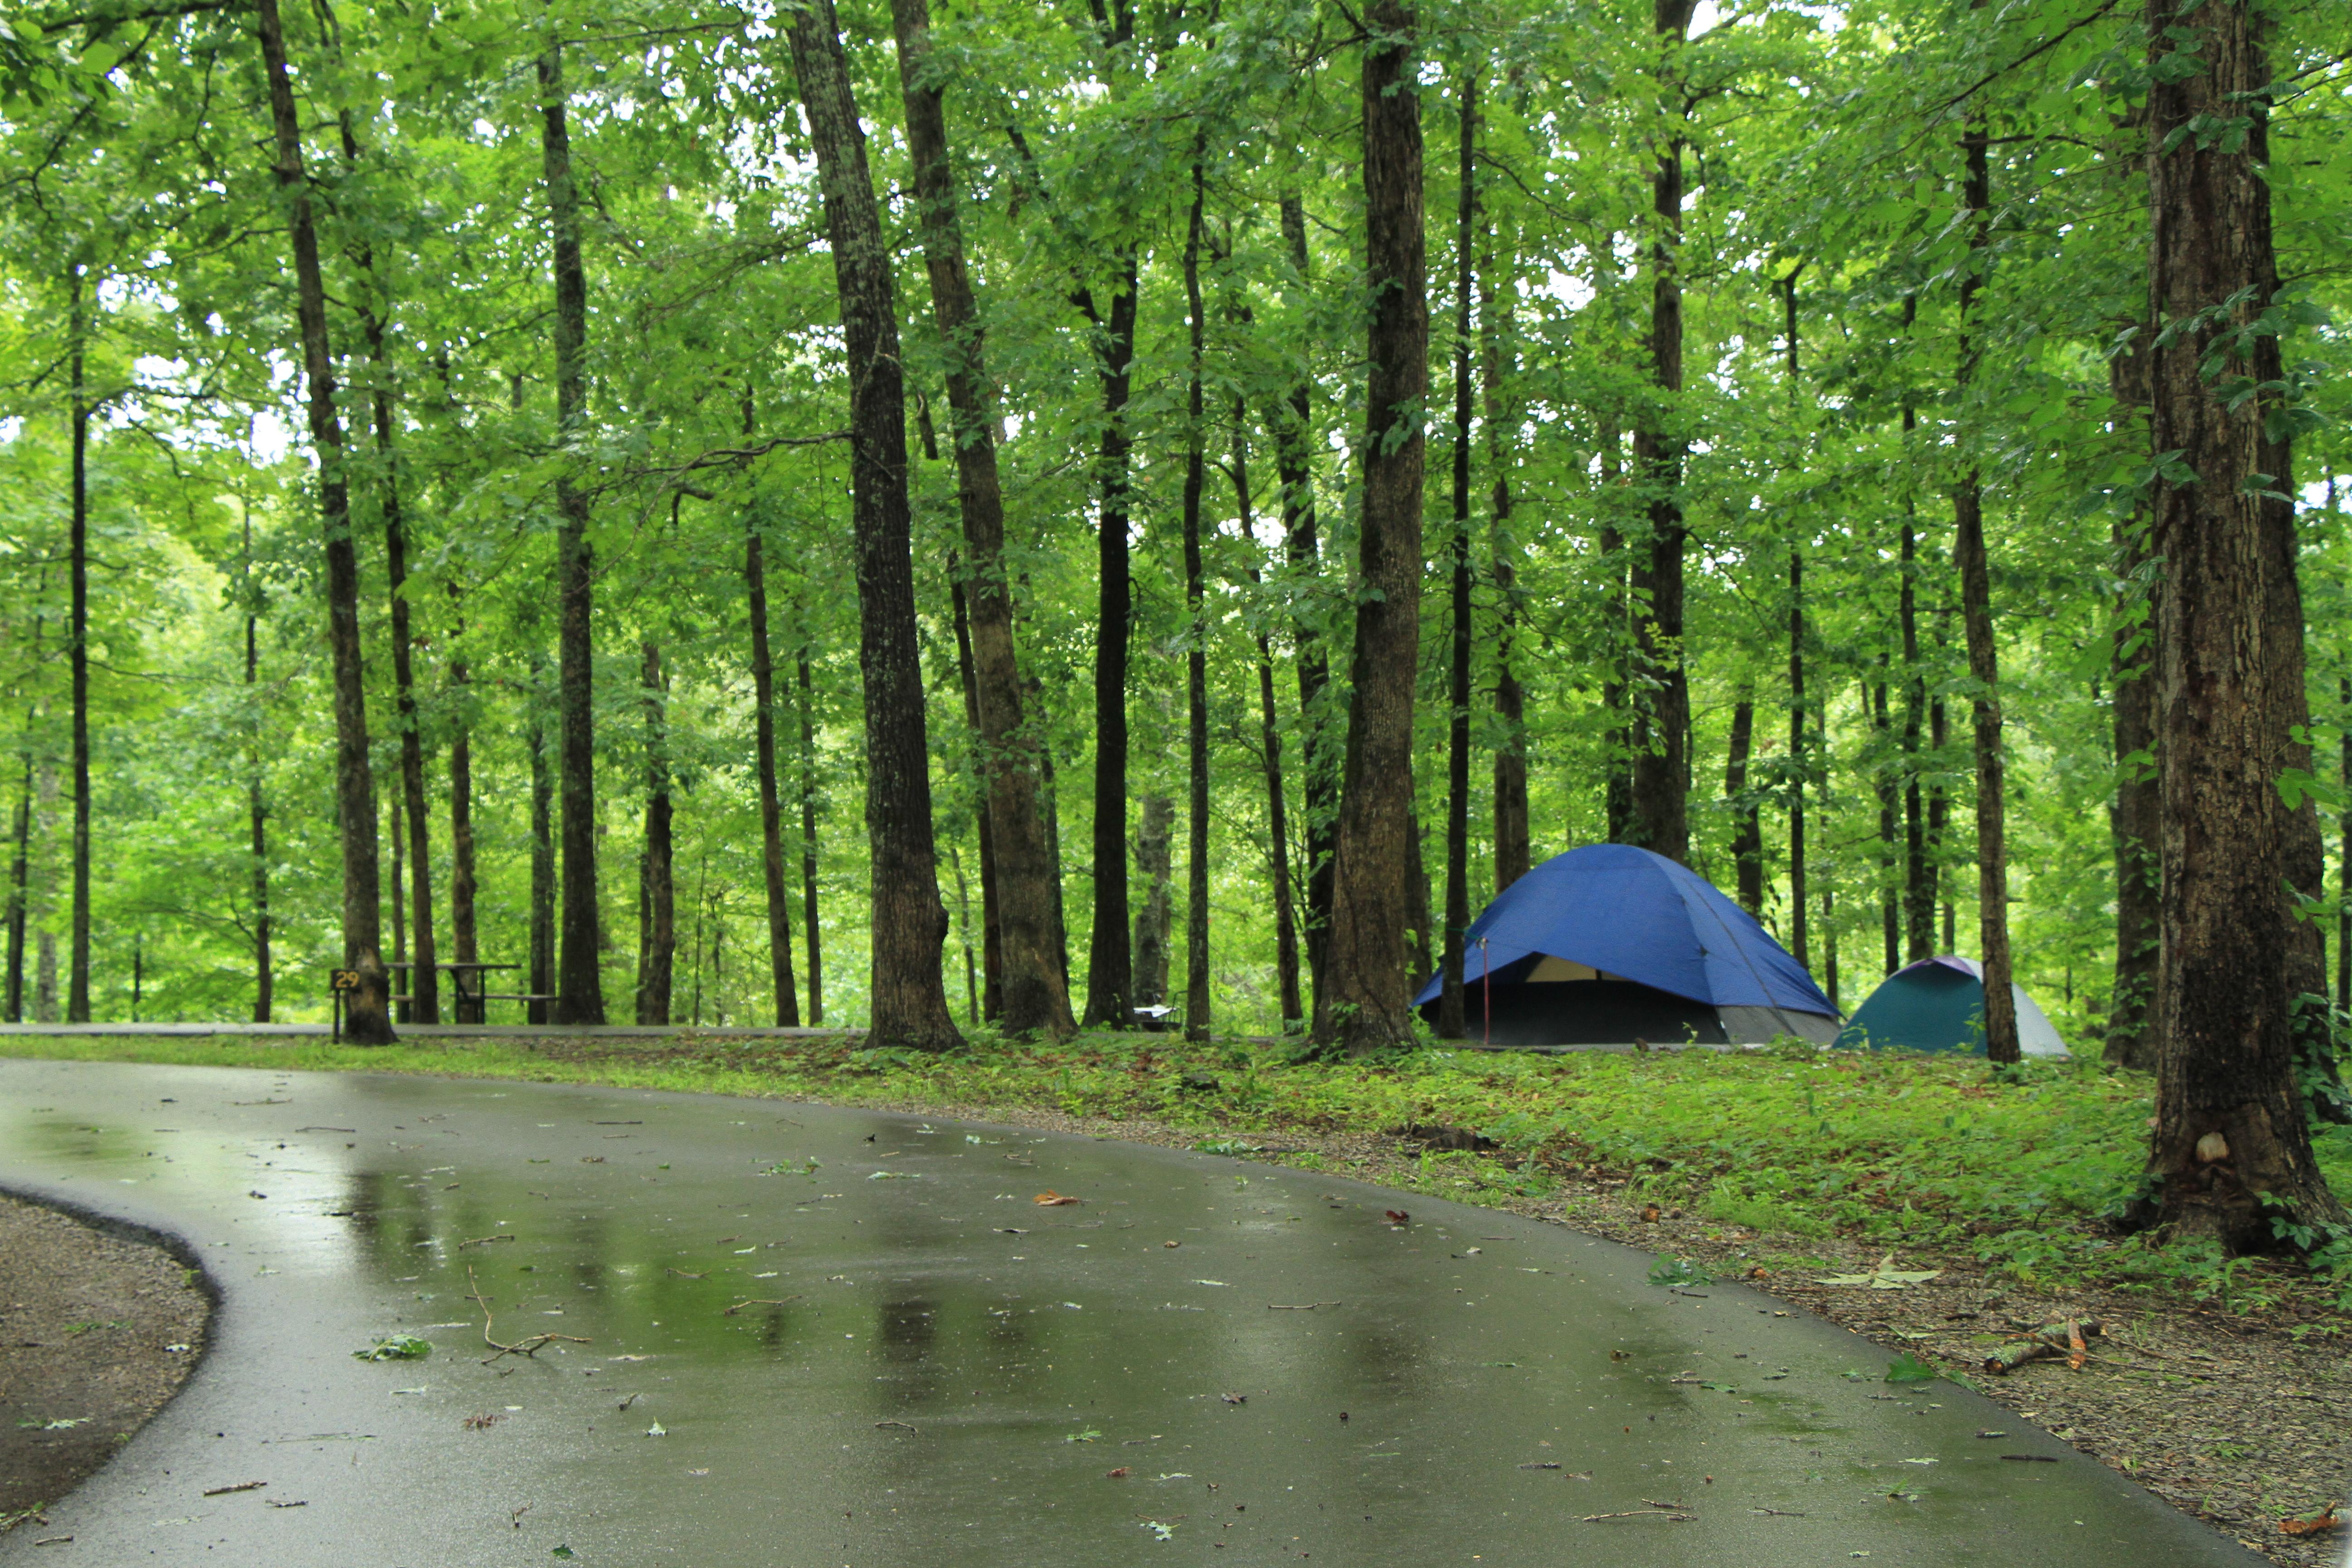 Two blue tents are set up at campsite 29. The site is surrounded by green trees.